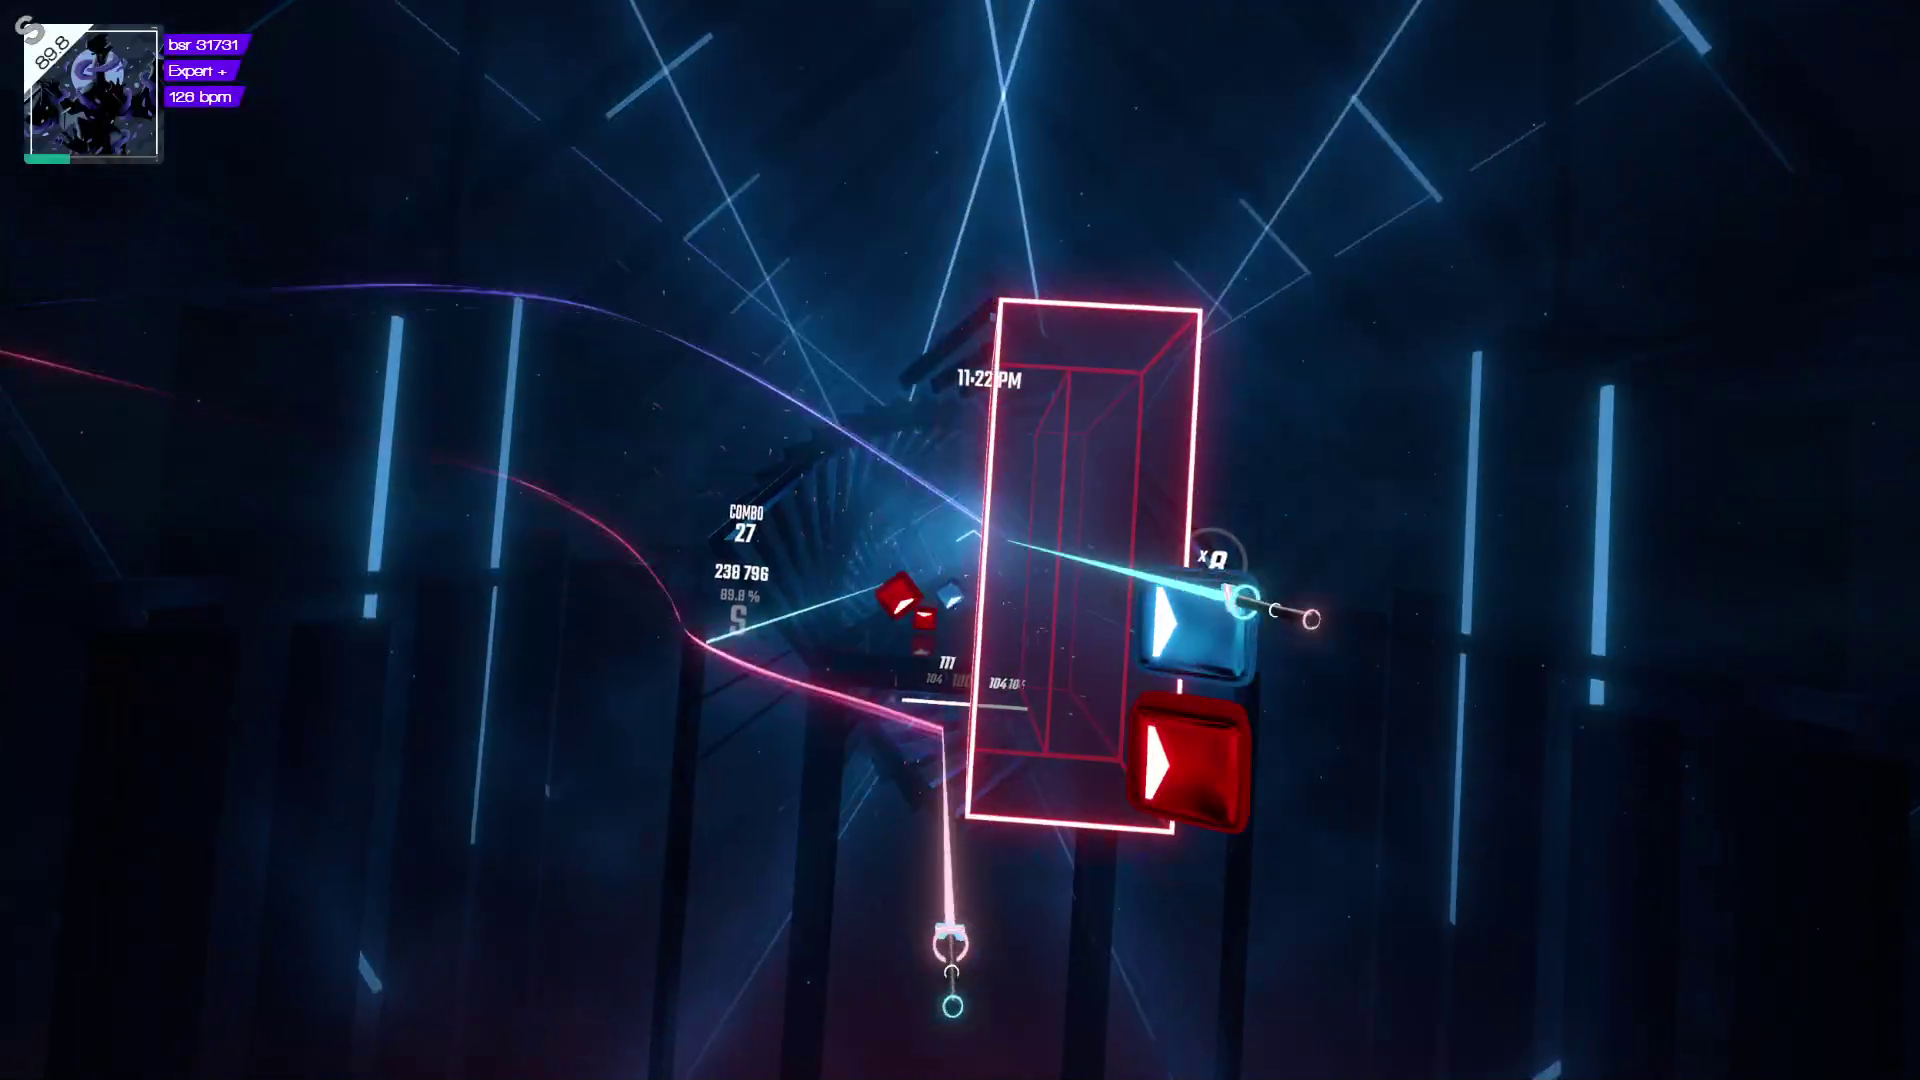 Beat Saber with it's default colors of red and blue